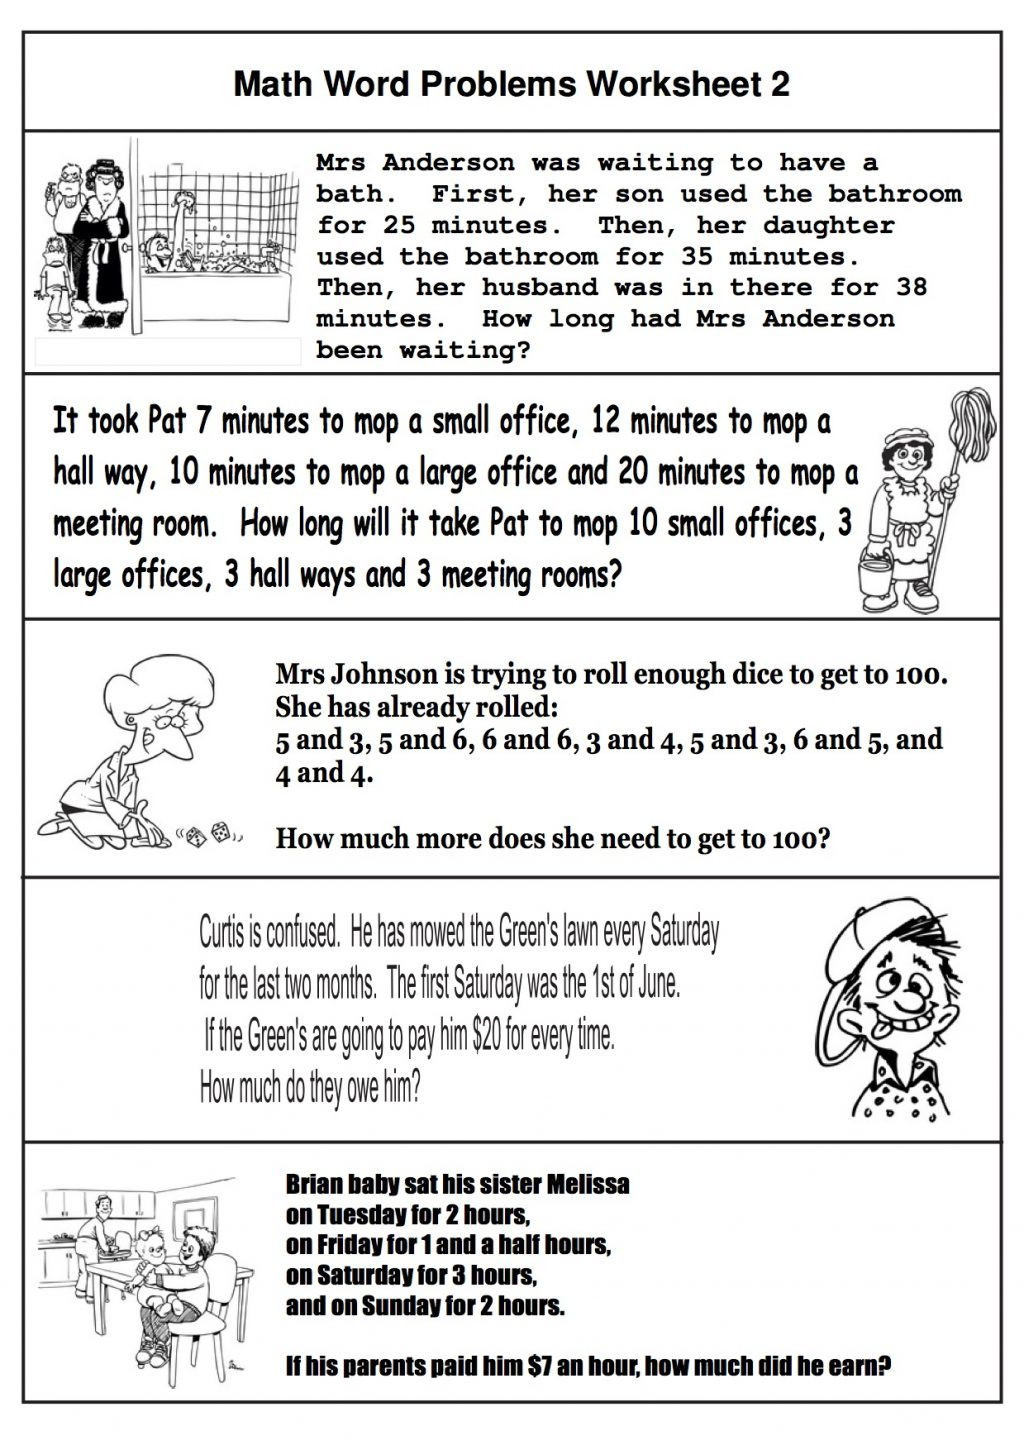 30 Two Step Word Problems Worksheet Education Template